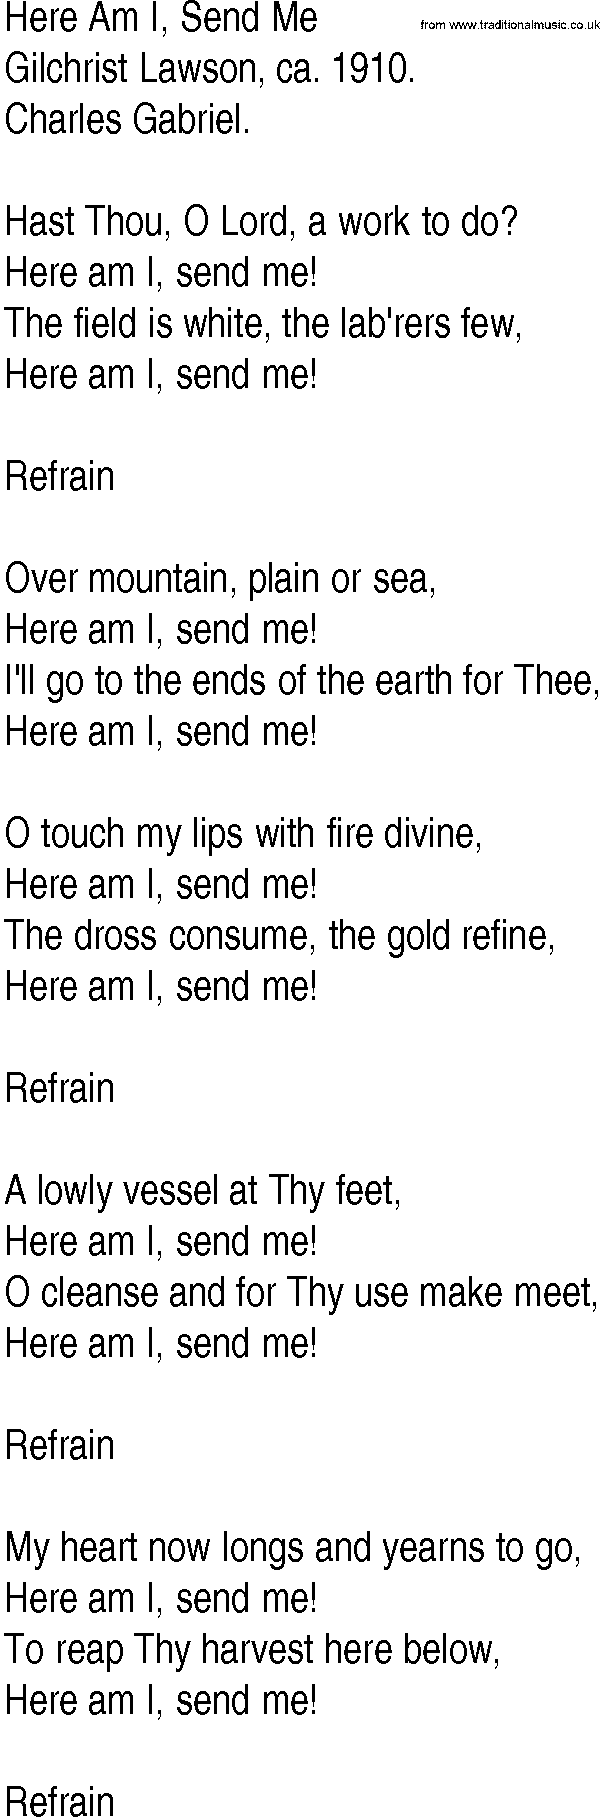 Hymn and Gospel Song: Here Am I, Send Me by Gilchrist Lawson lyrics